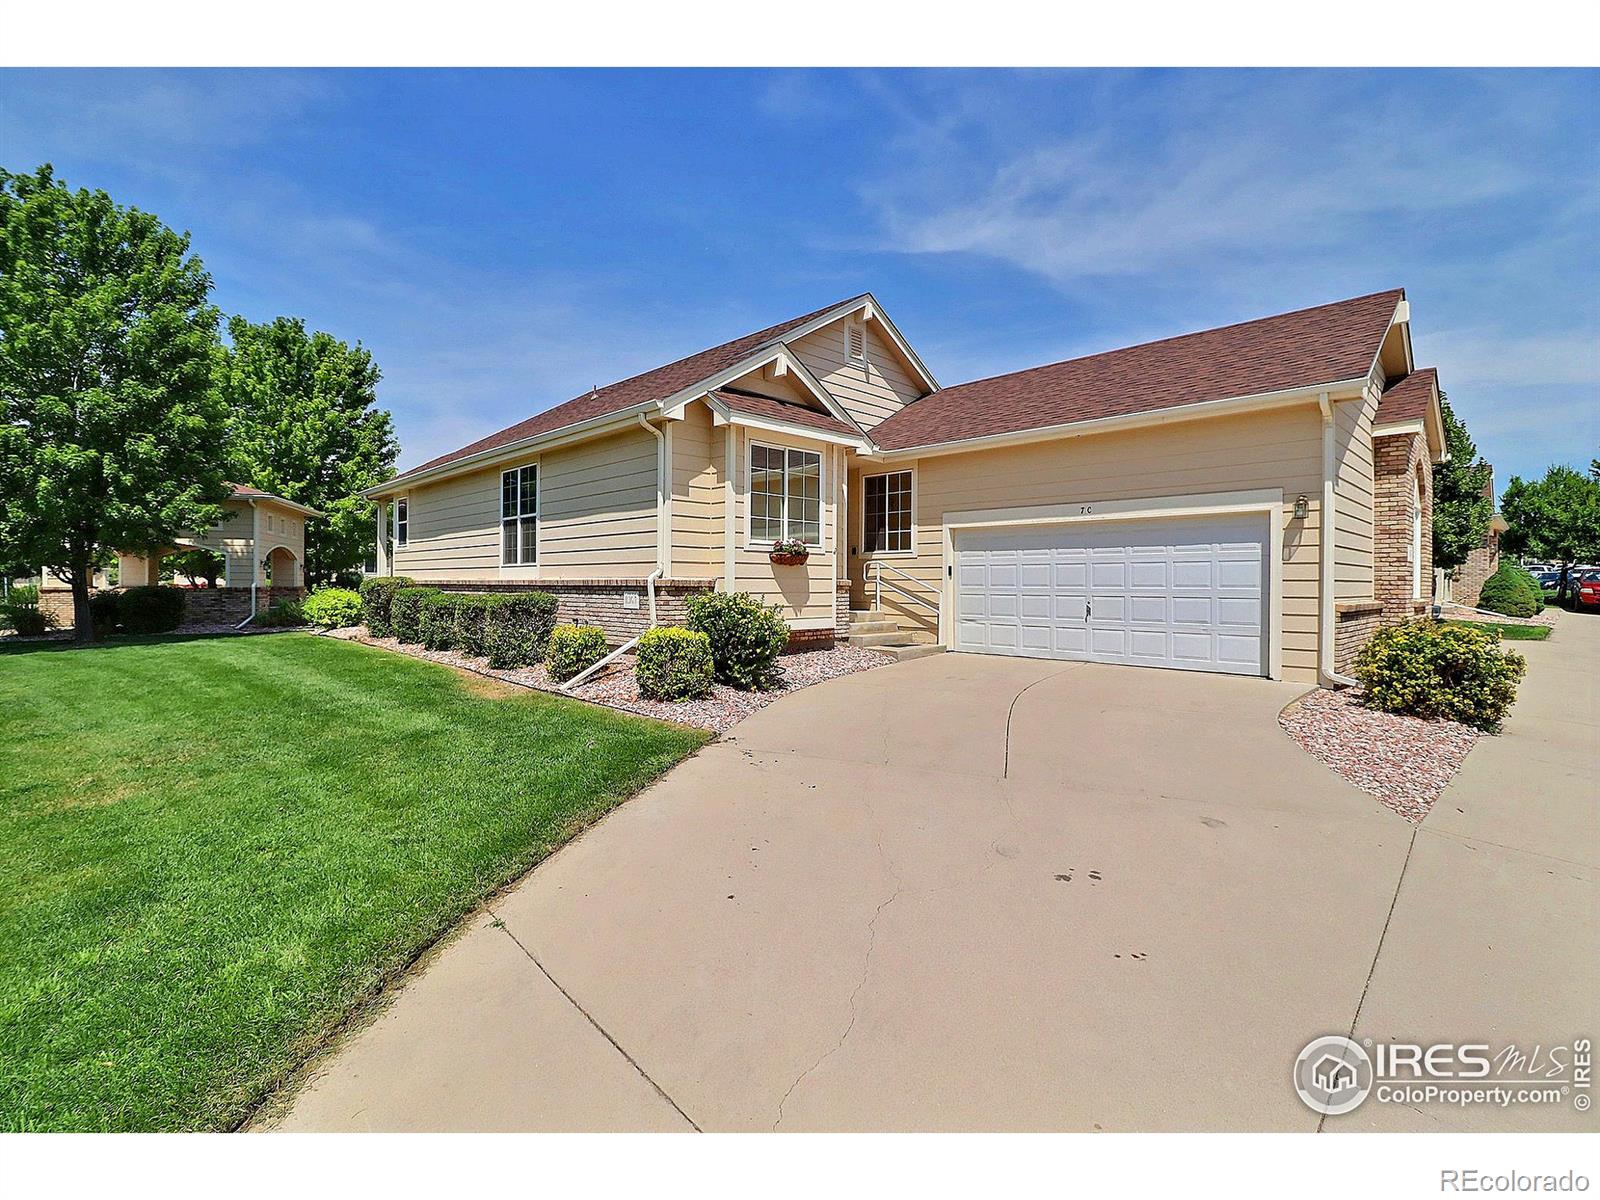 4902 29th, Greeley, CO